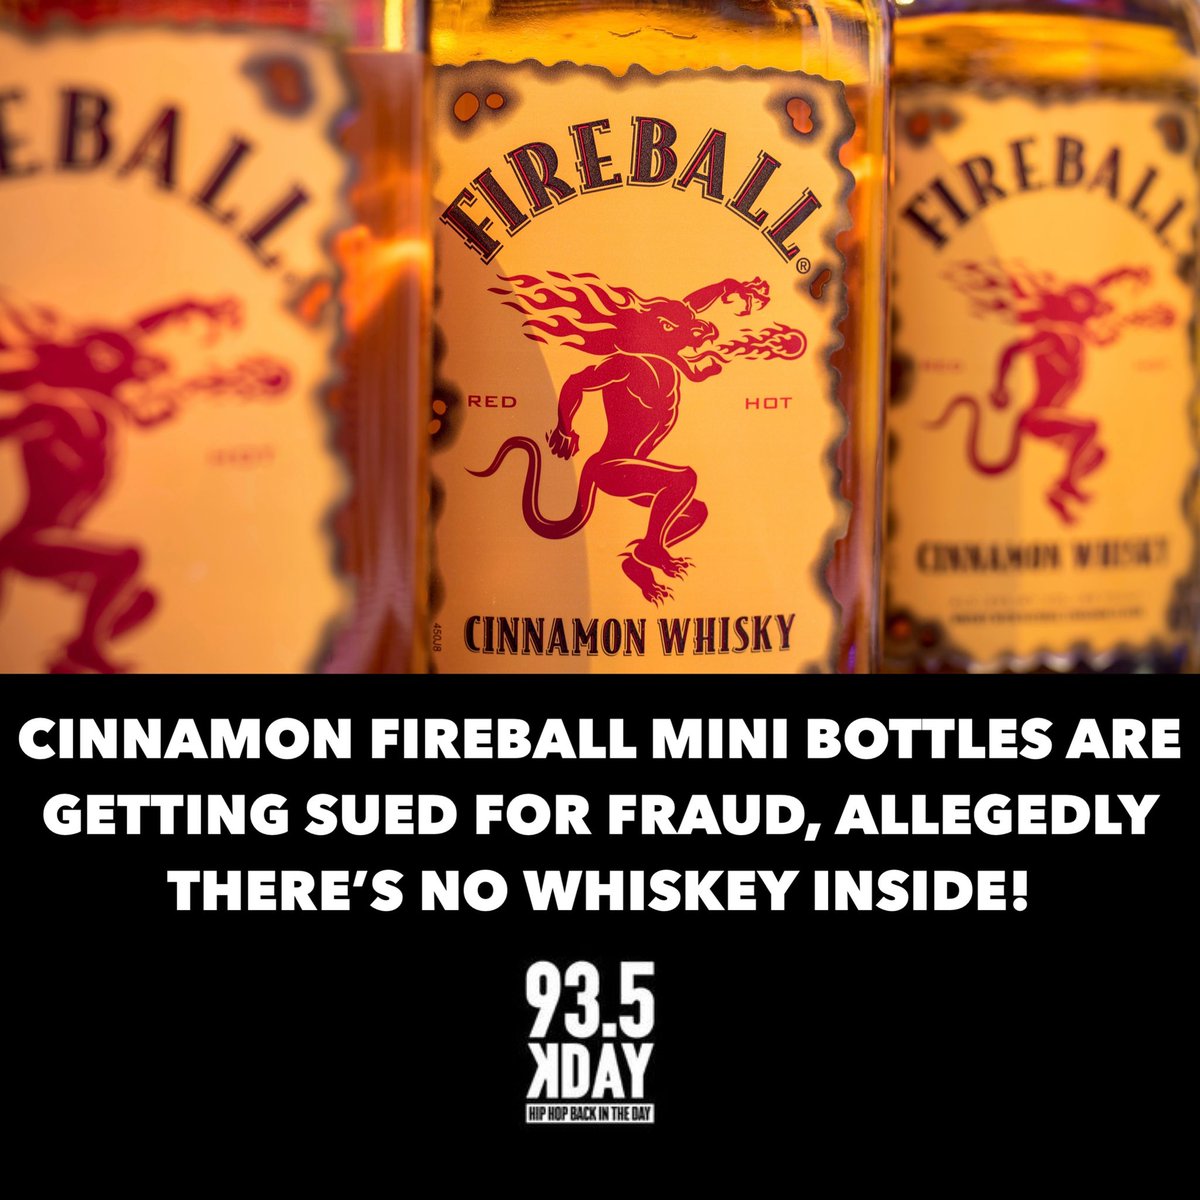 The Fireball maker is being sued! The lawsuit alleges that Fireball Cinnamon mini bottles don't contain whiskey! The drink is a malt beverage flavored to taste like whiskey 👀🥃🤔 Y'all ever got tipsy off a mini bottle? #CommentBelow 👇🏾 • 📷: Shutterstock